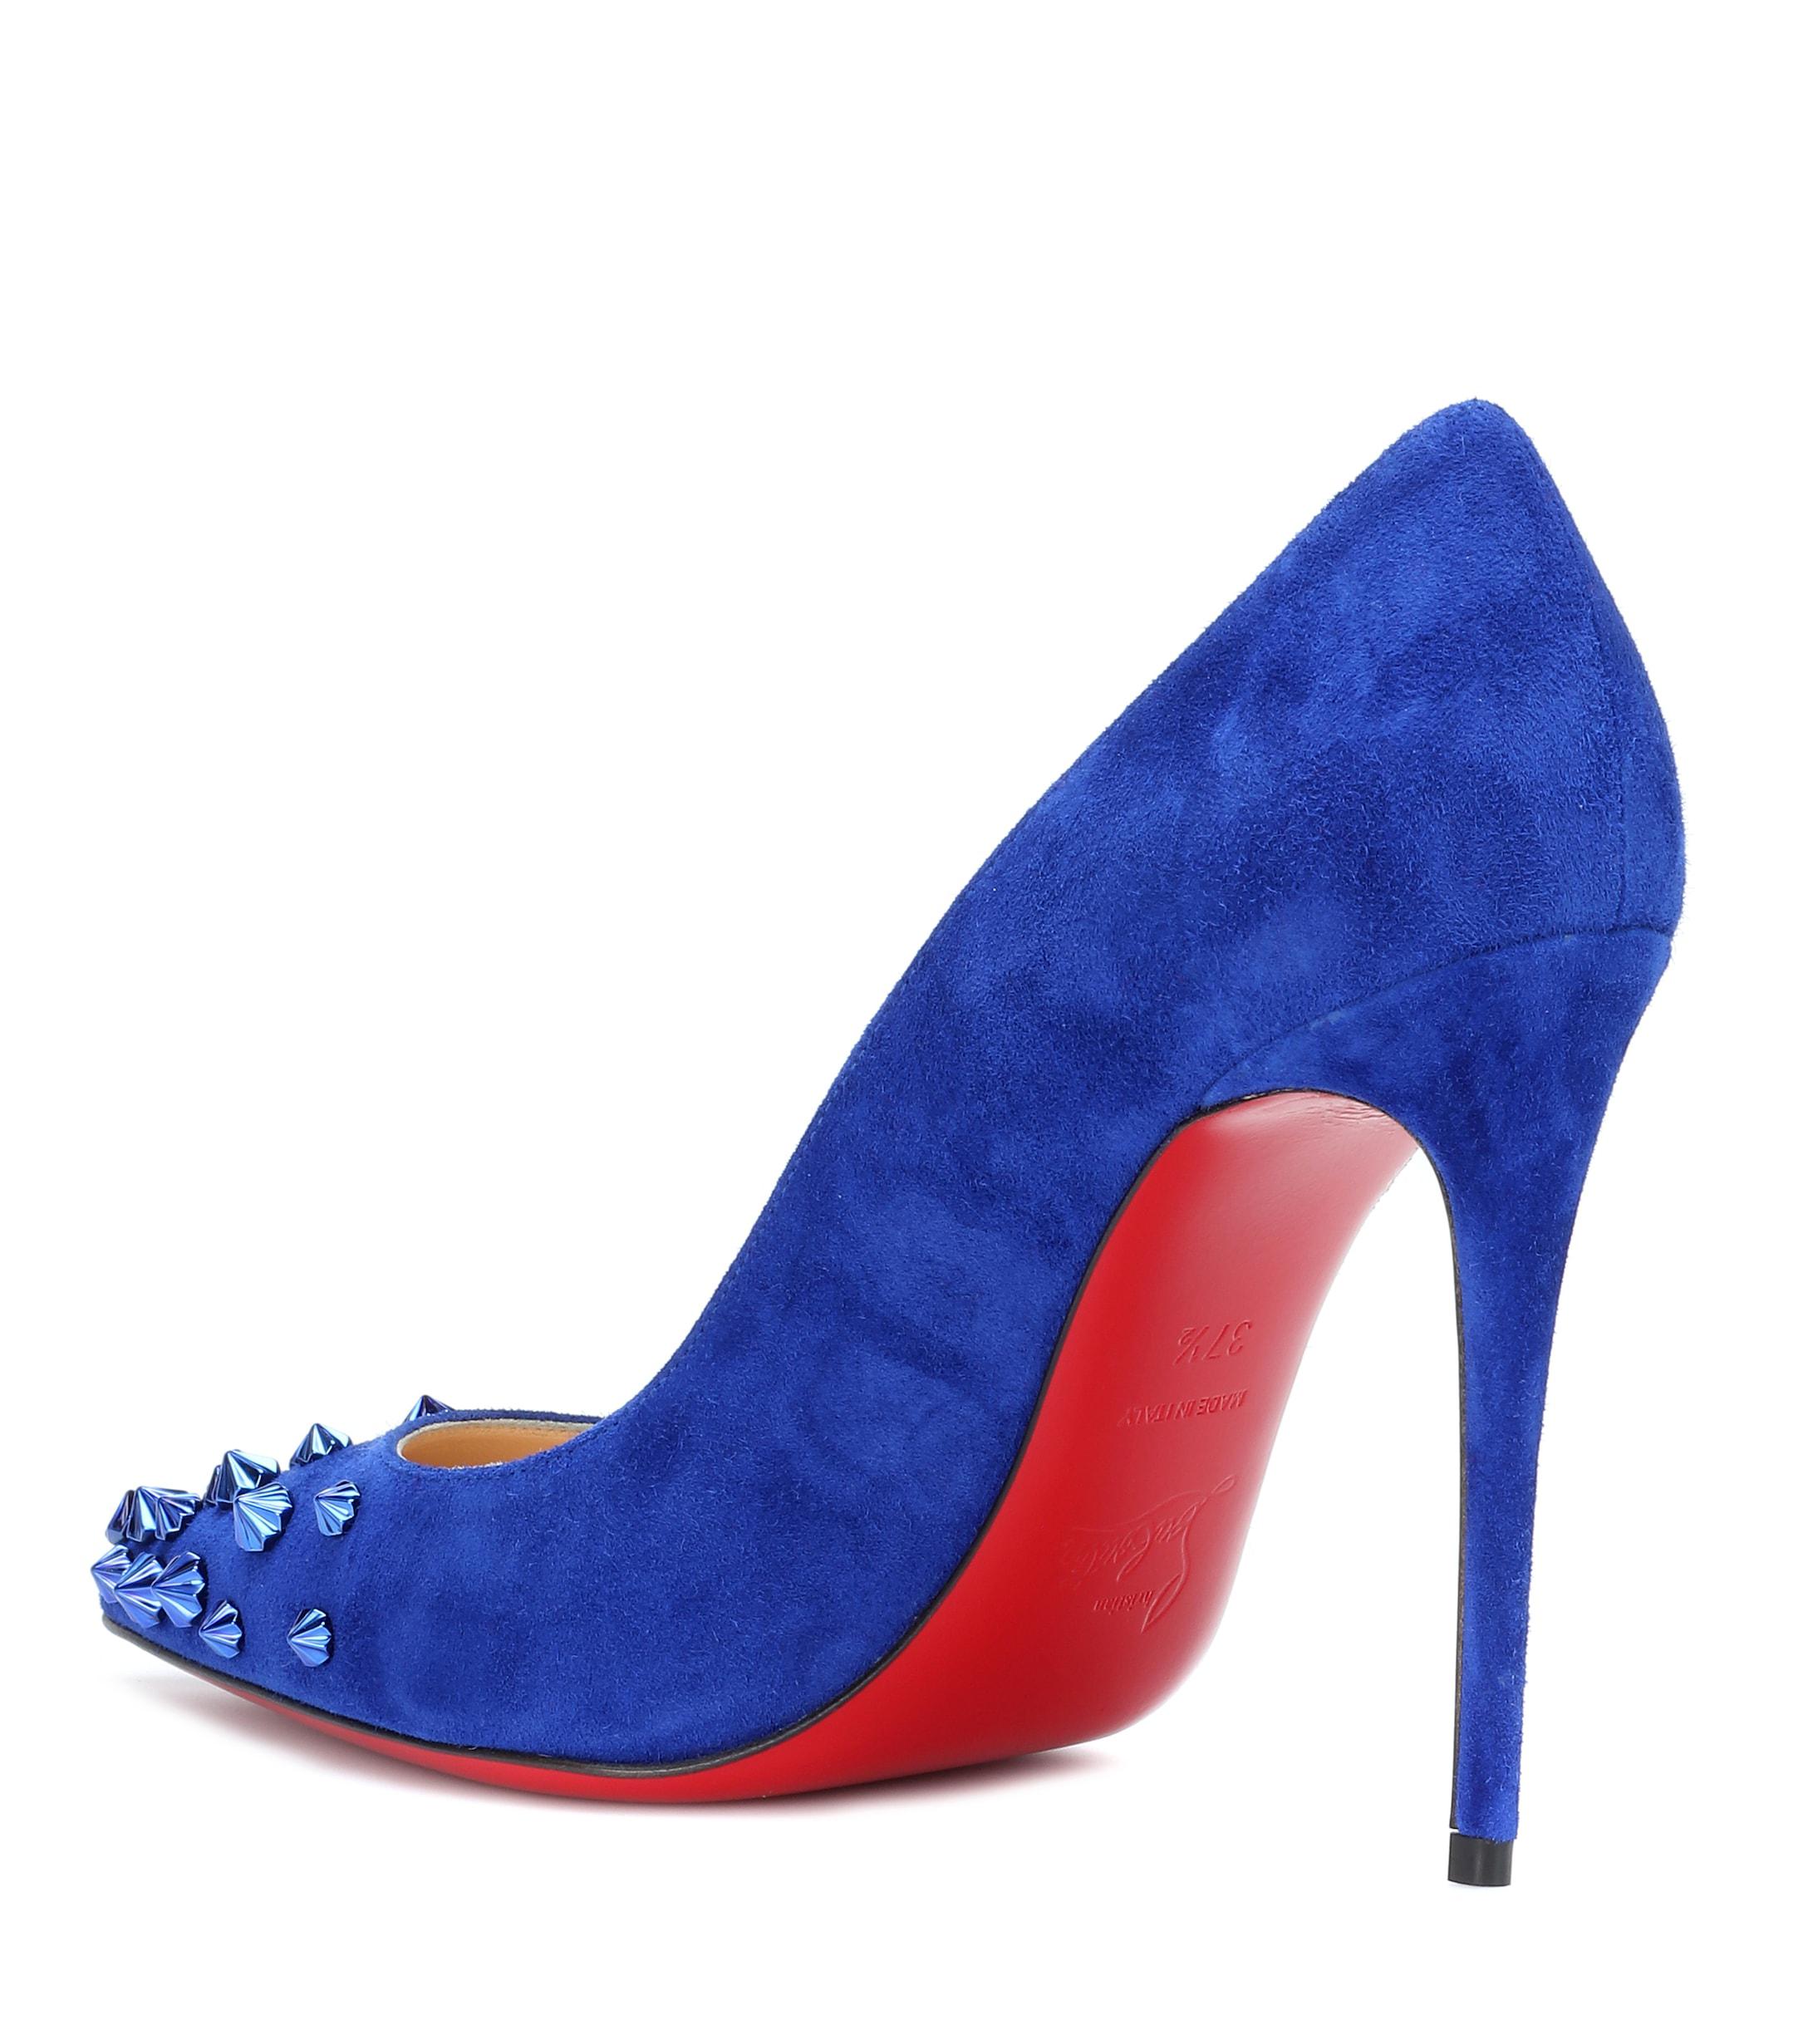 Christian Louboutin Drama 100 Suede Pumps in Blue - Lyst